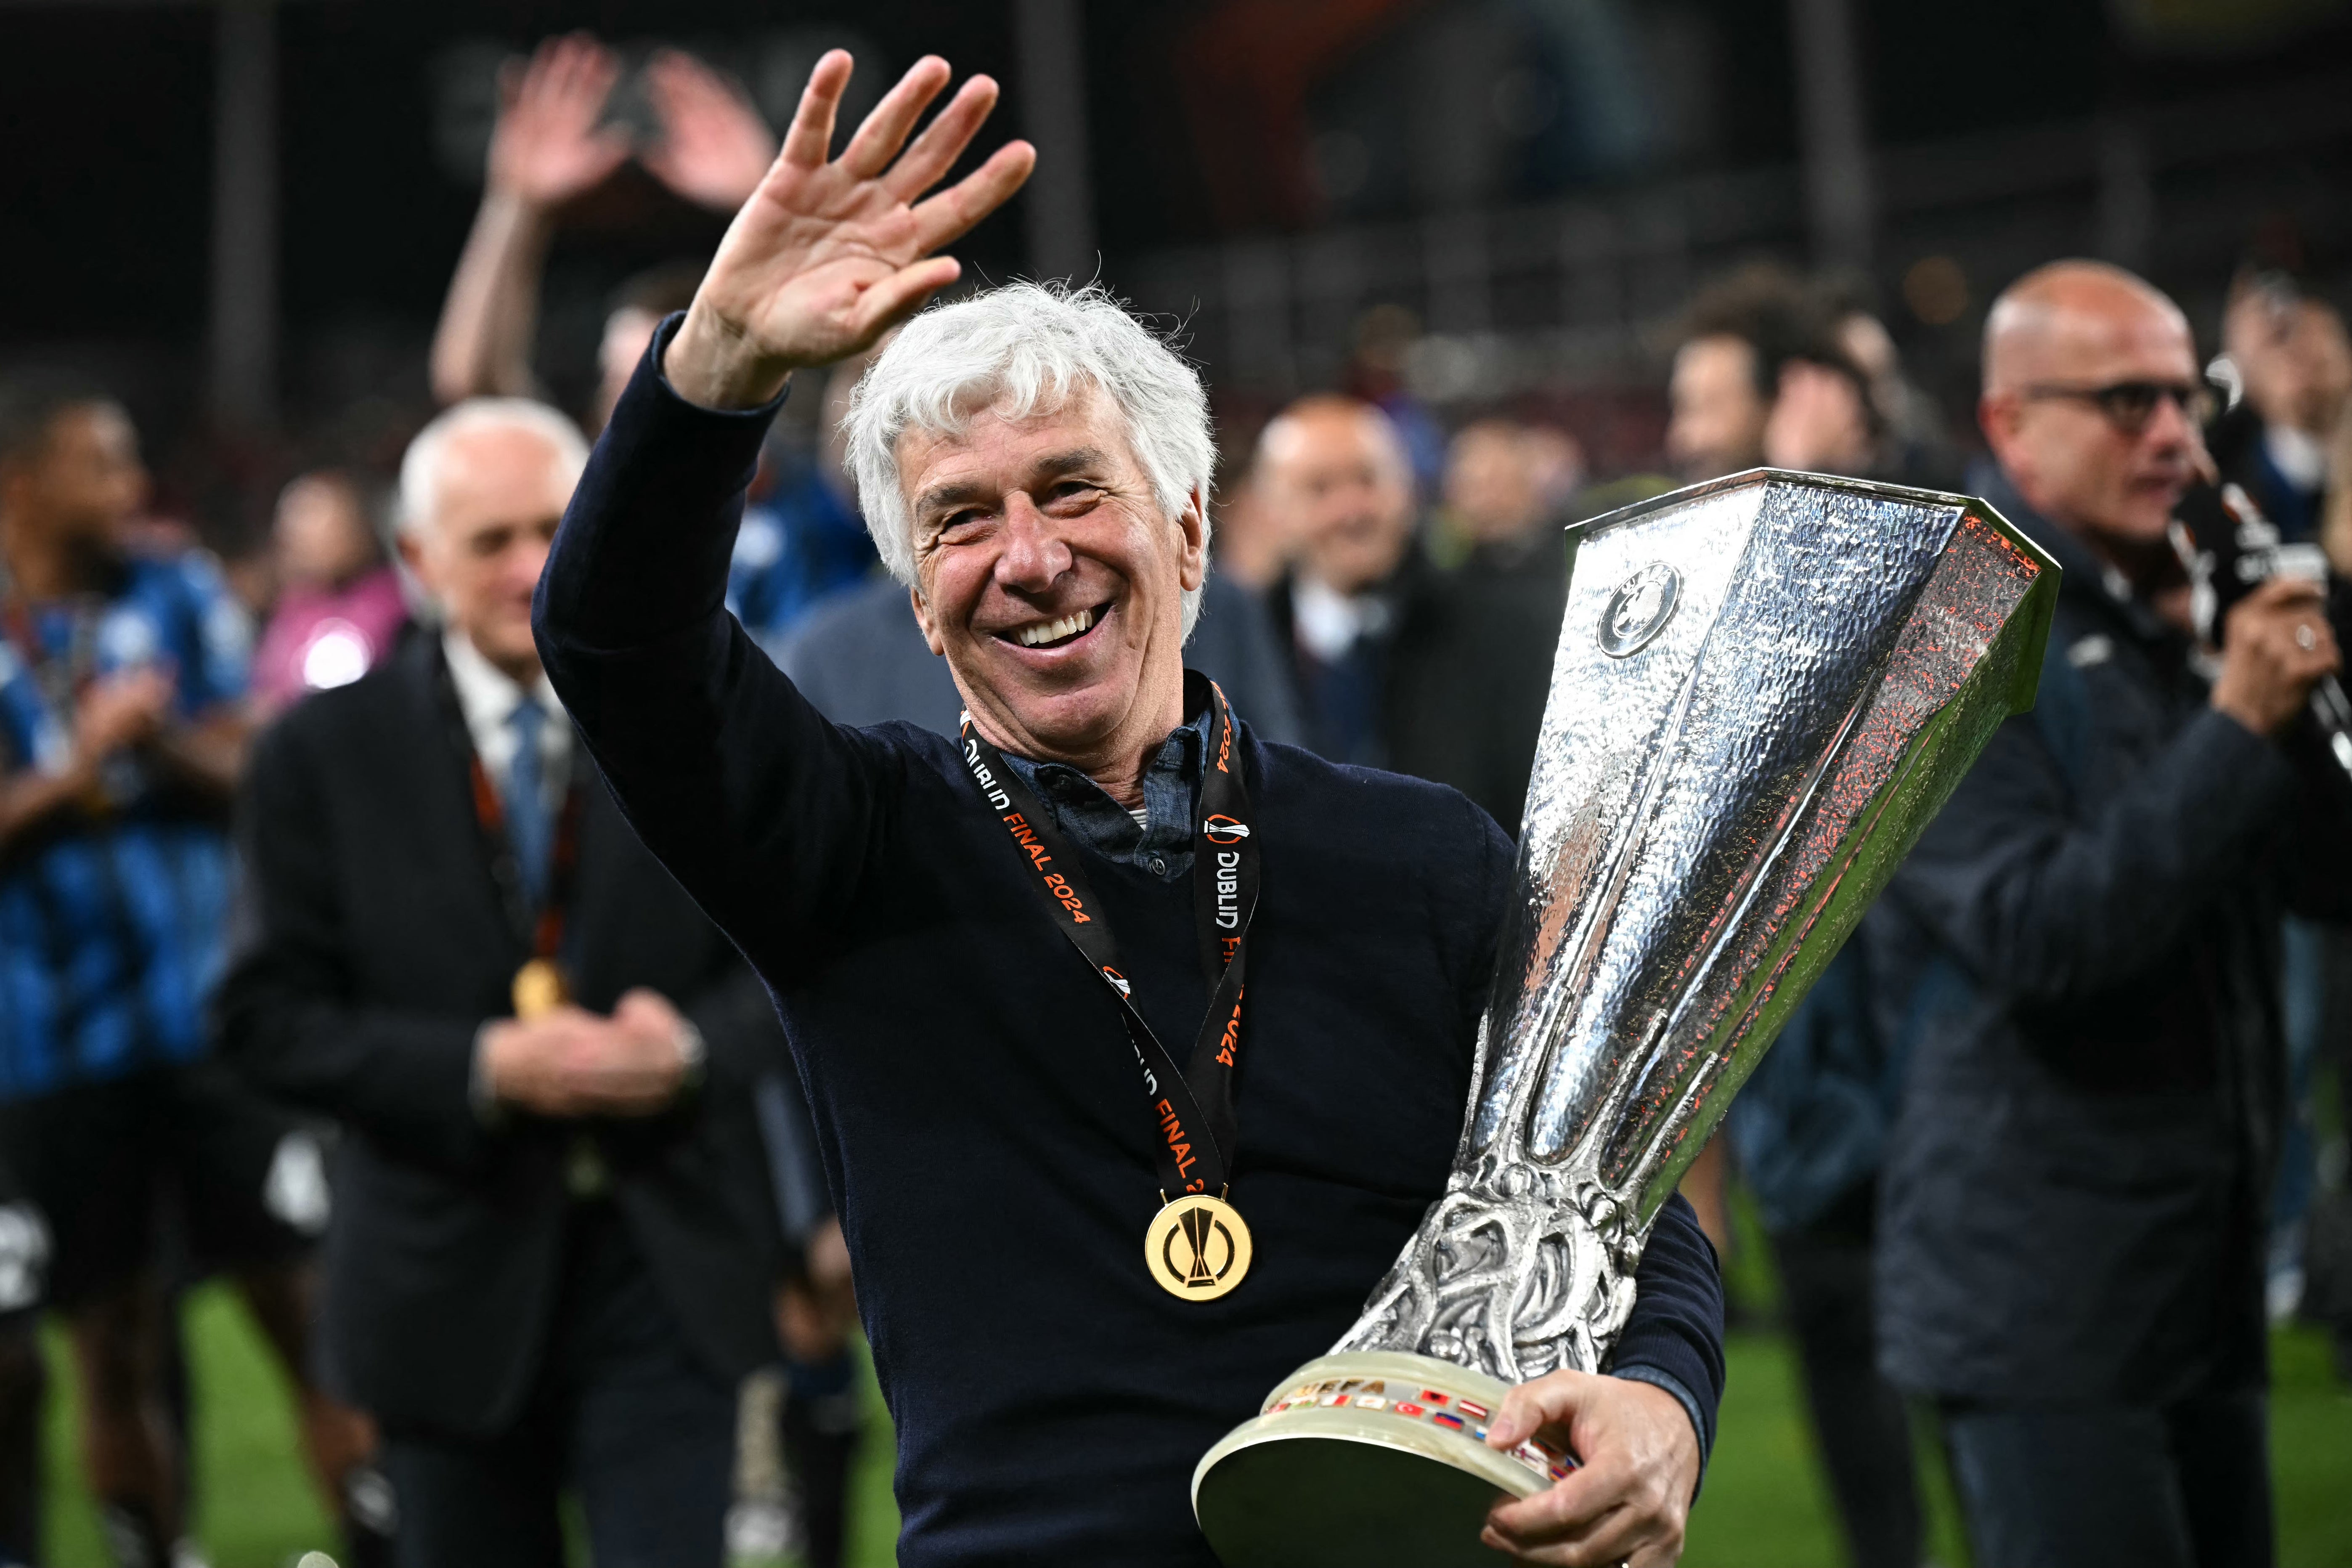 Winning the Europa League also secured a first piece of silverware for the 66-year-old.